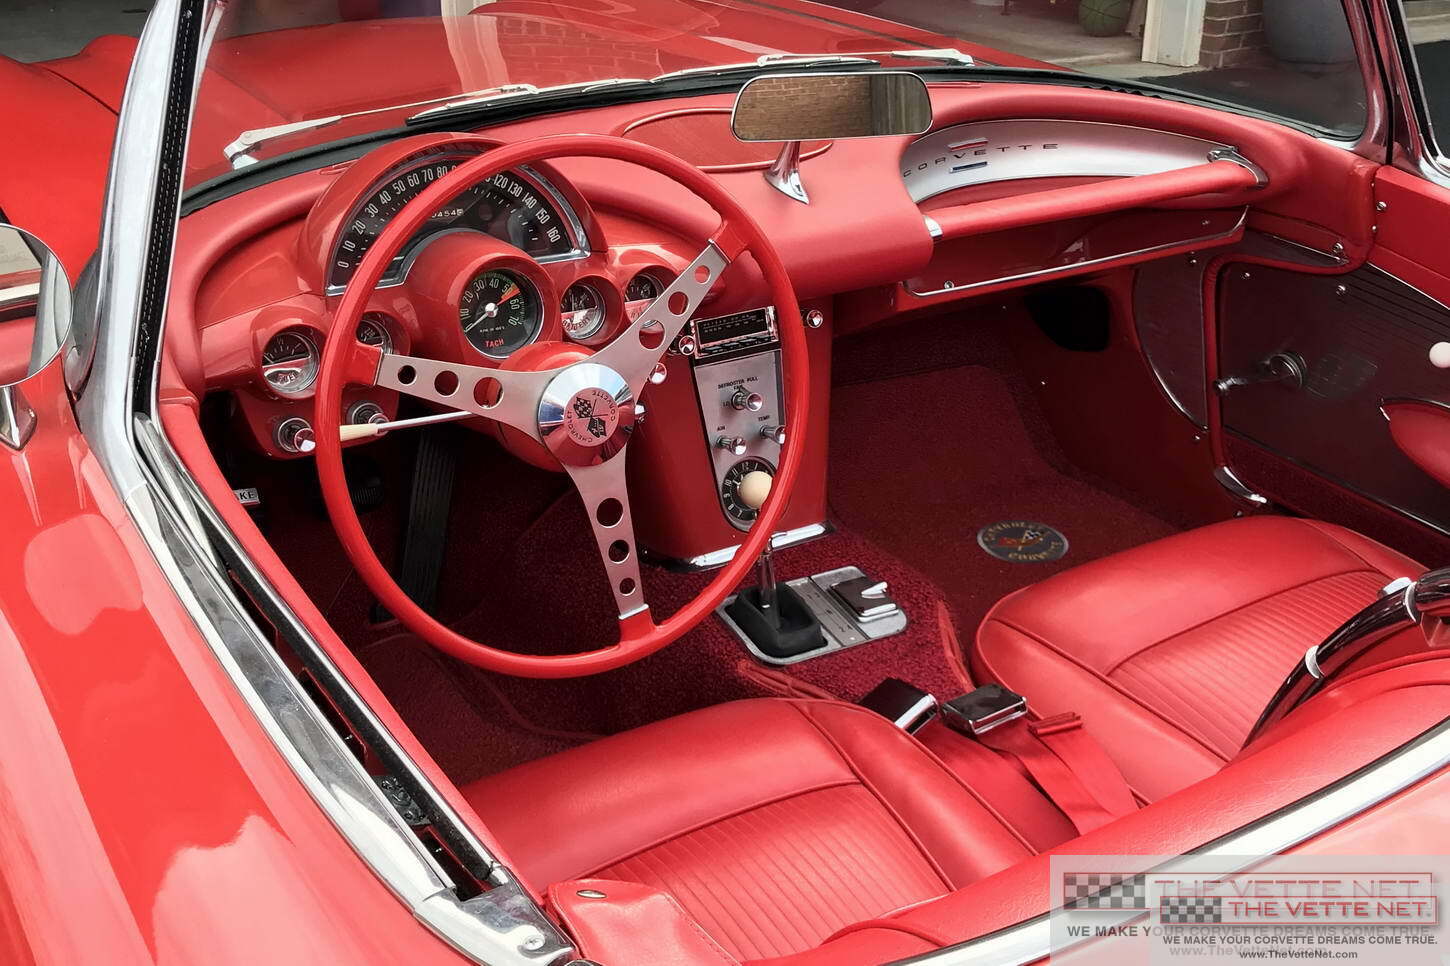 1961 Corvette Convertible Roman Red with White Coves